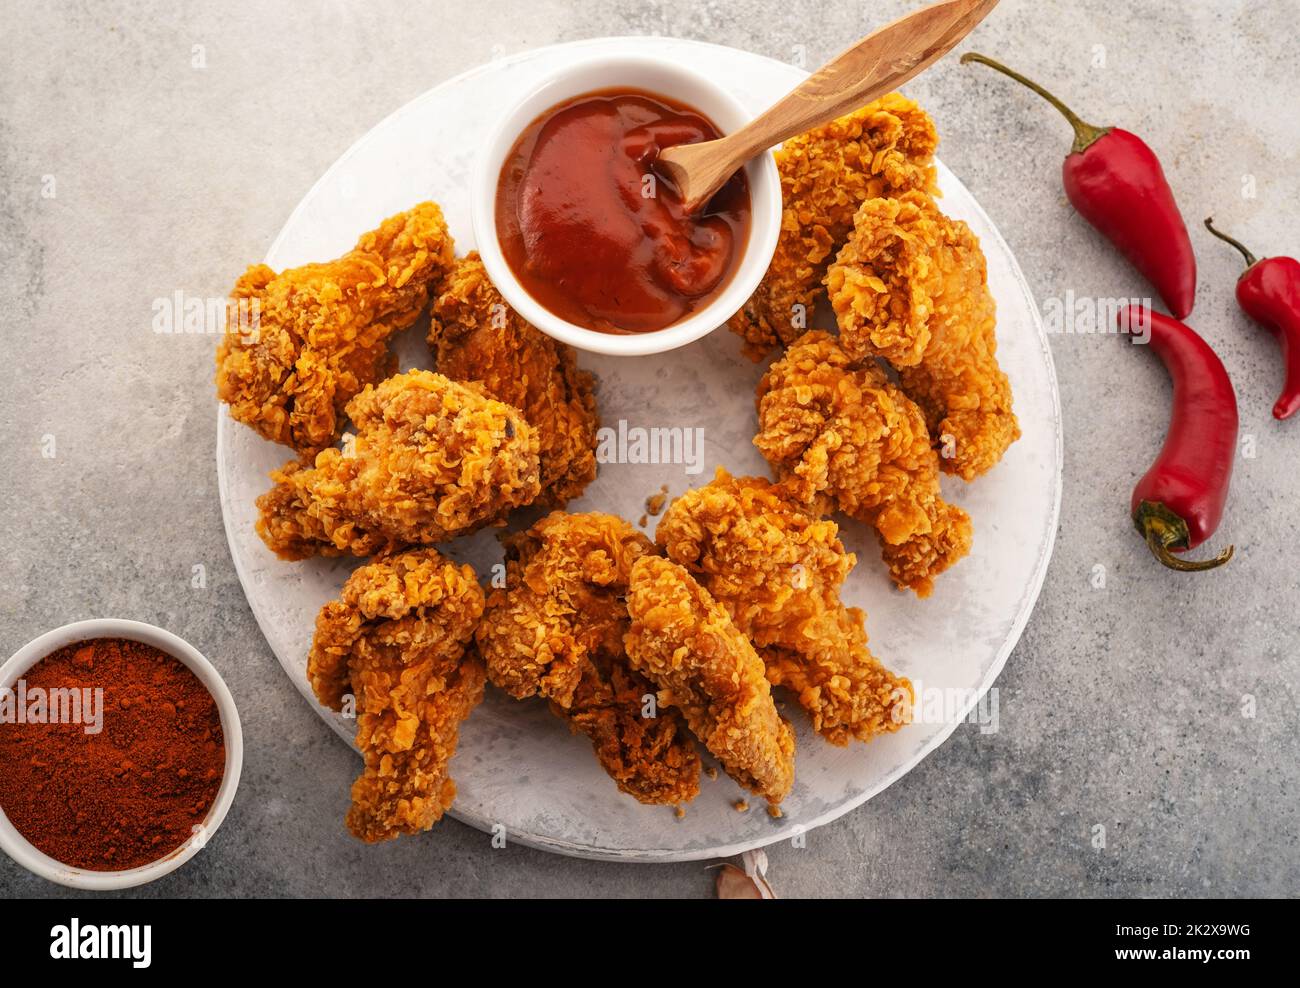 Spicy chicken wings breaded with spices and ketchup on the table. Stock Photo